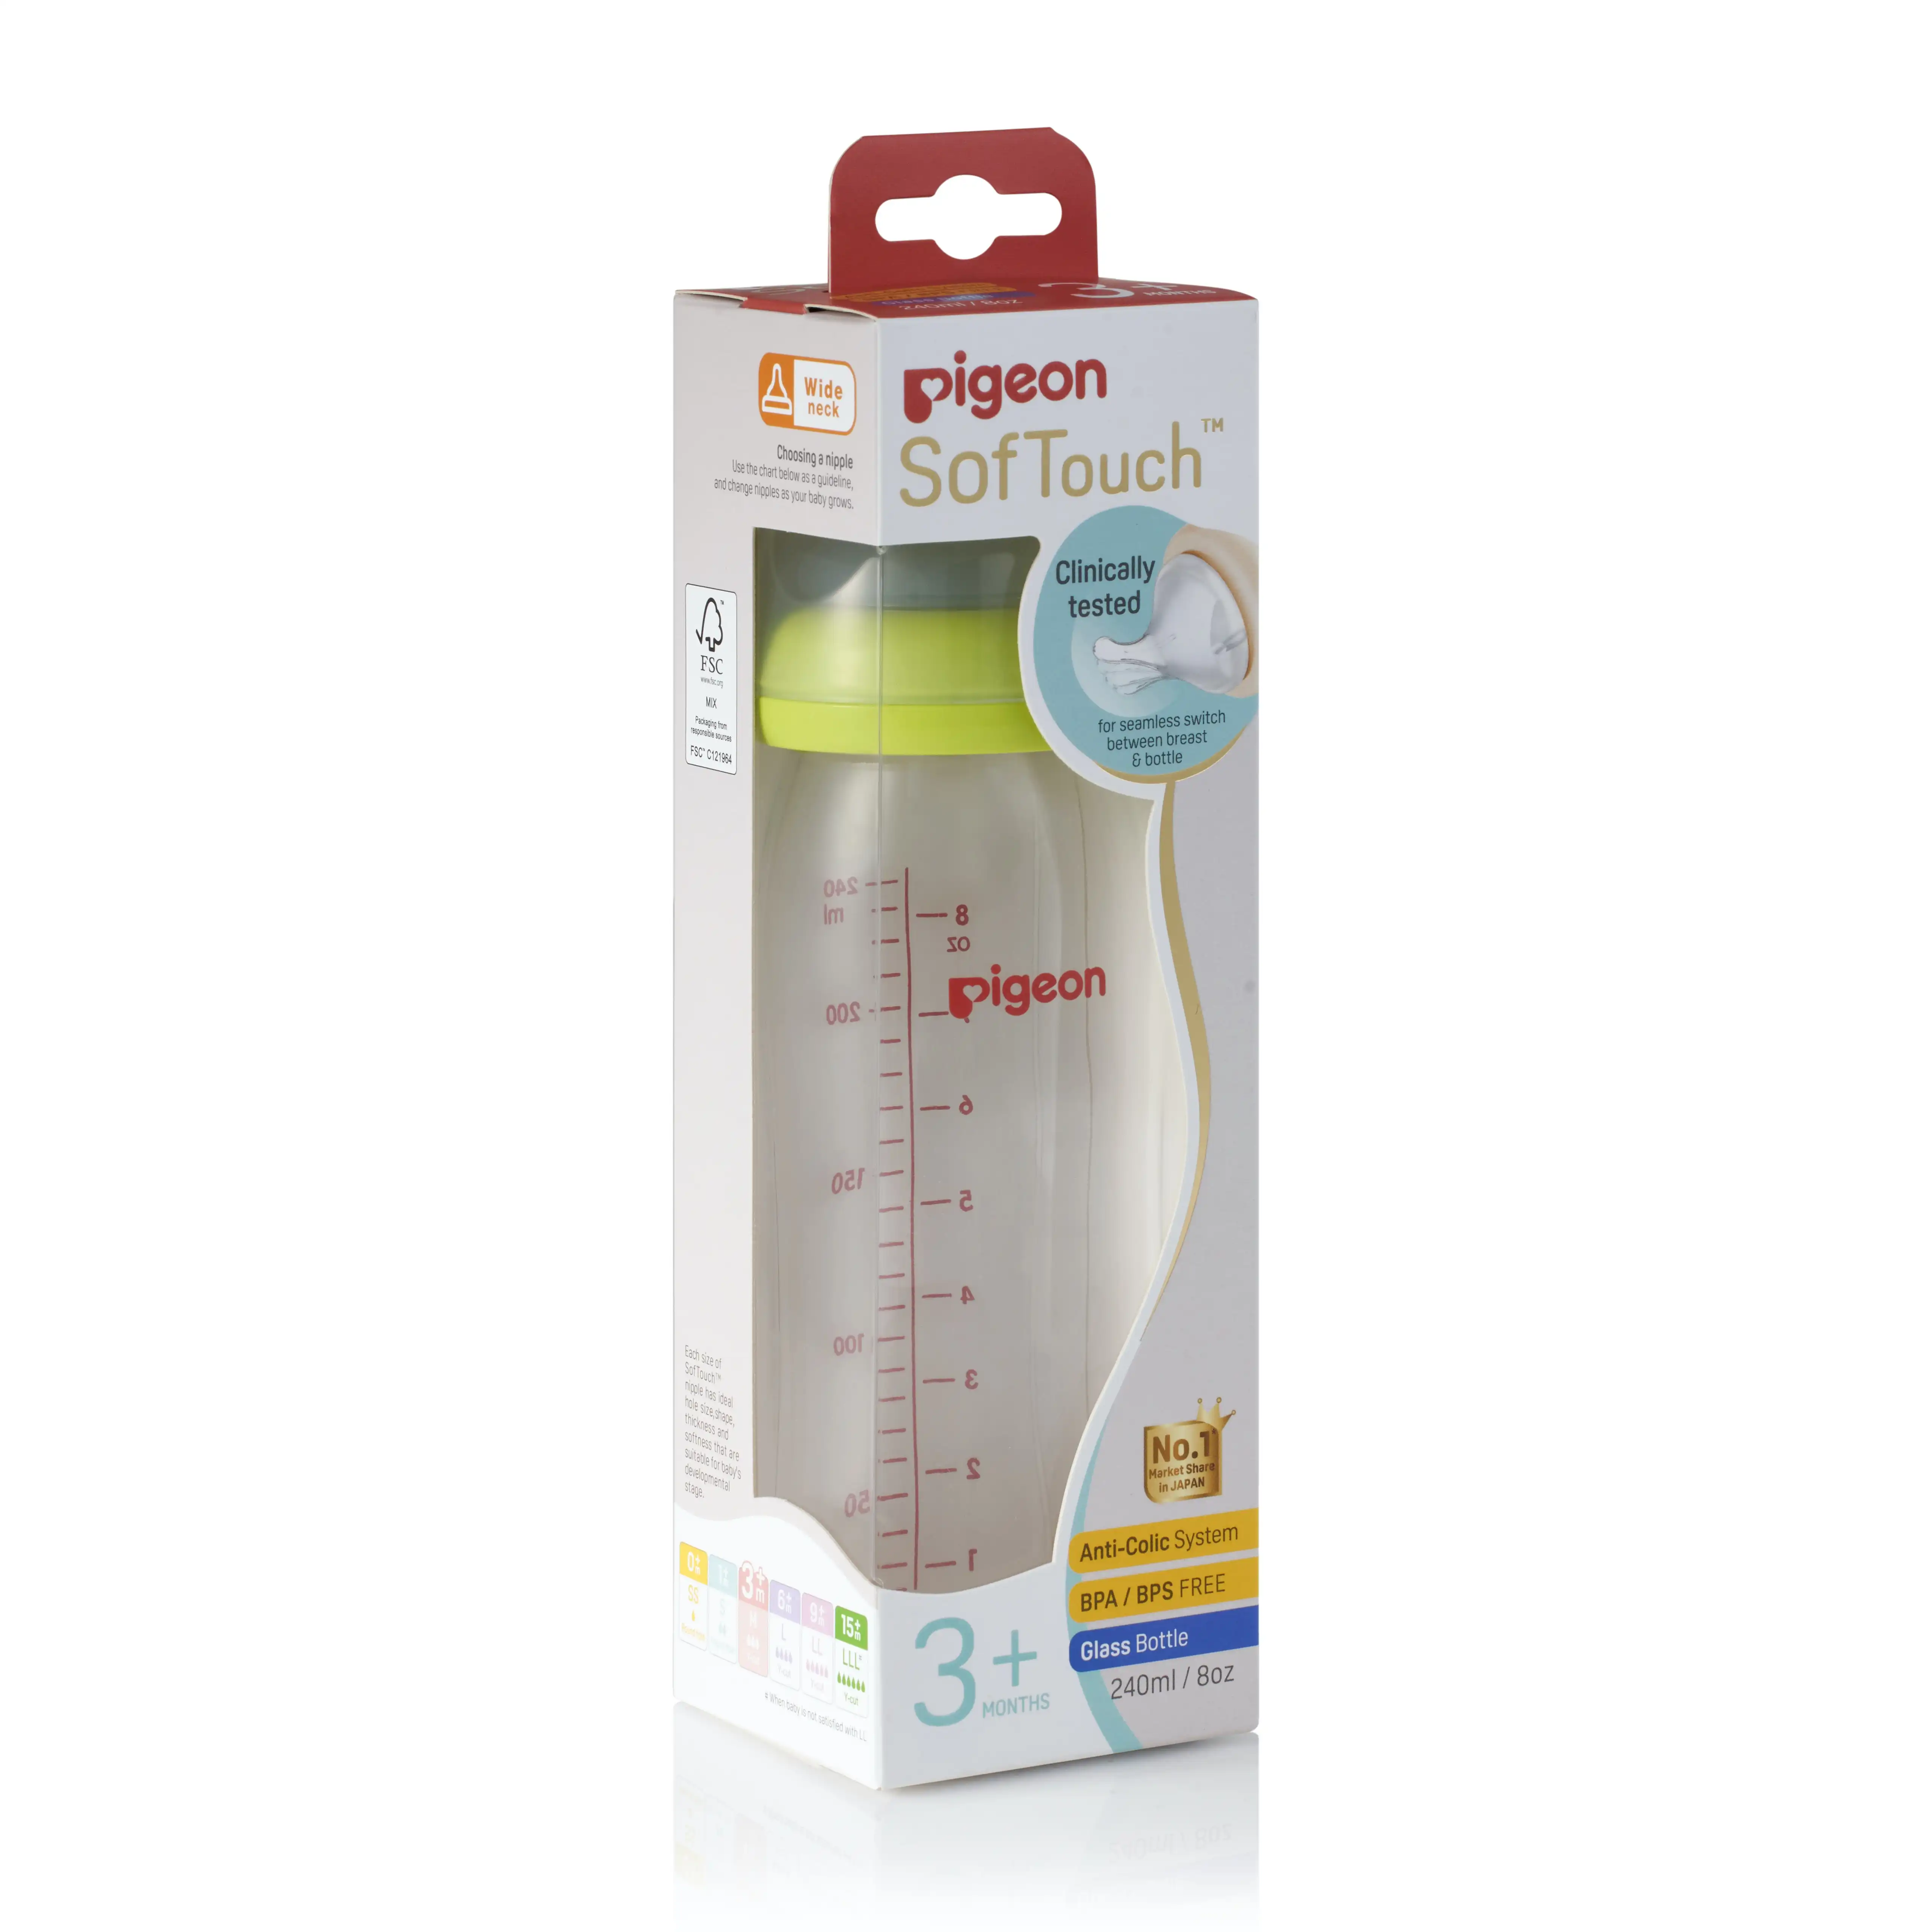 PIGEON SofTouch Bottle GLASS 240ml